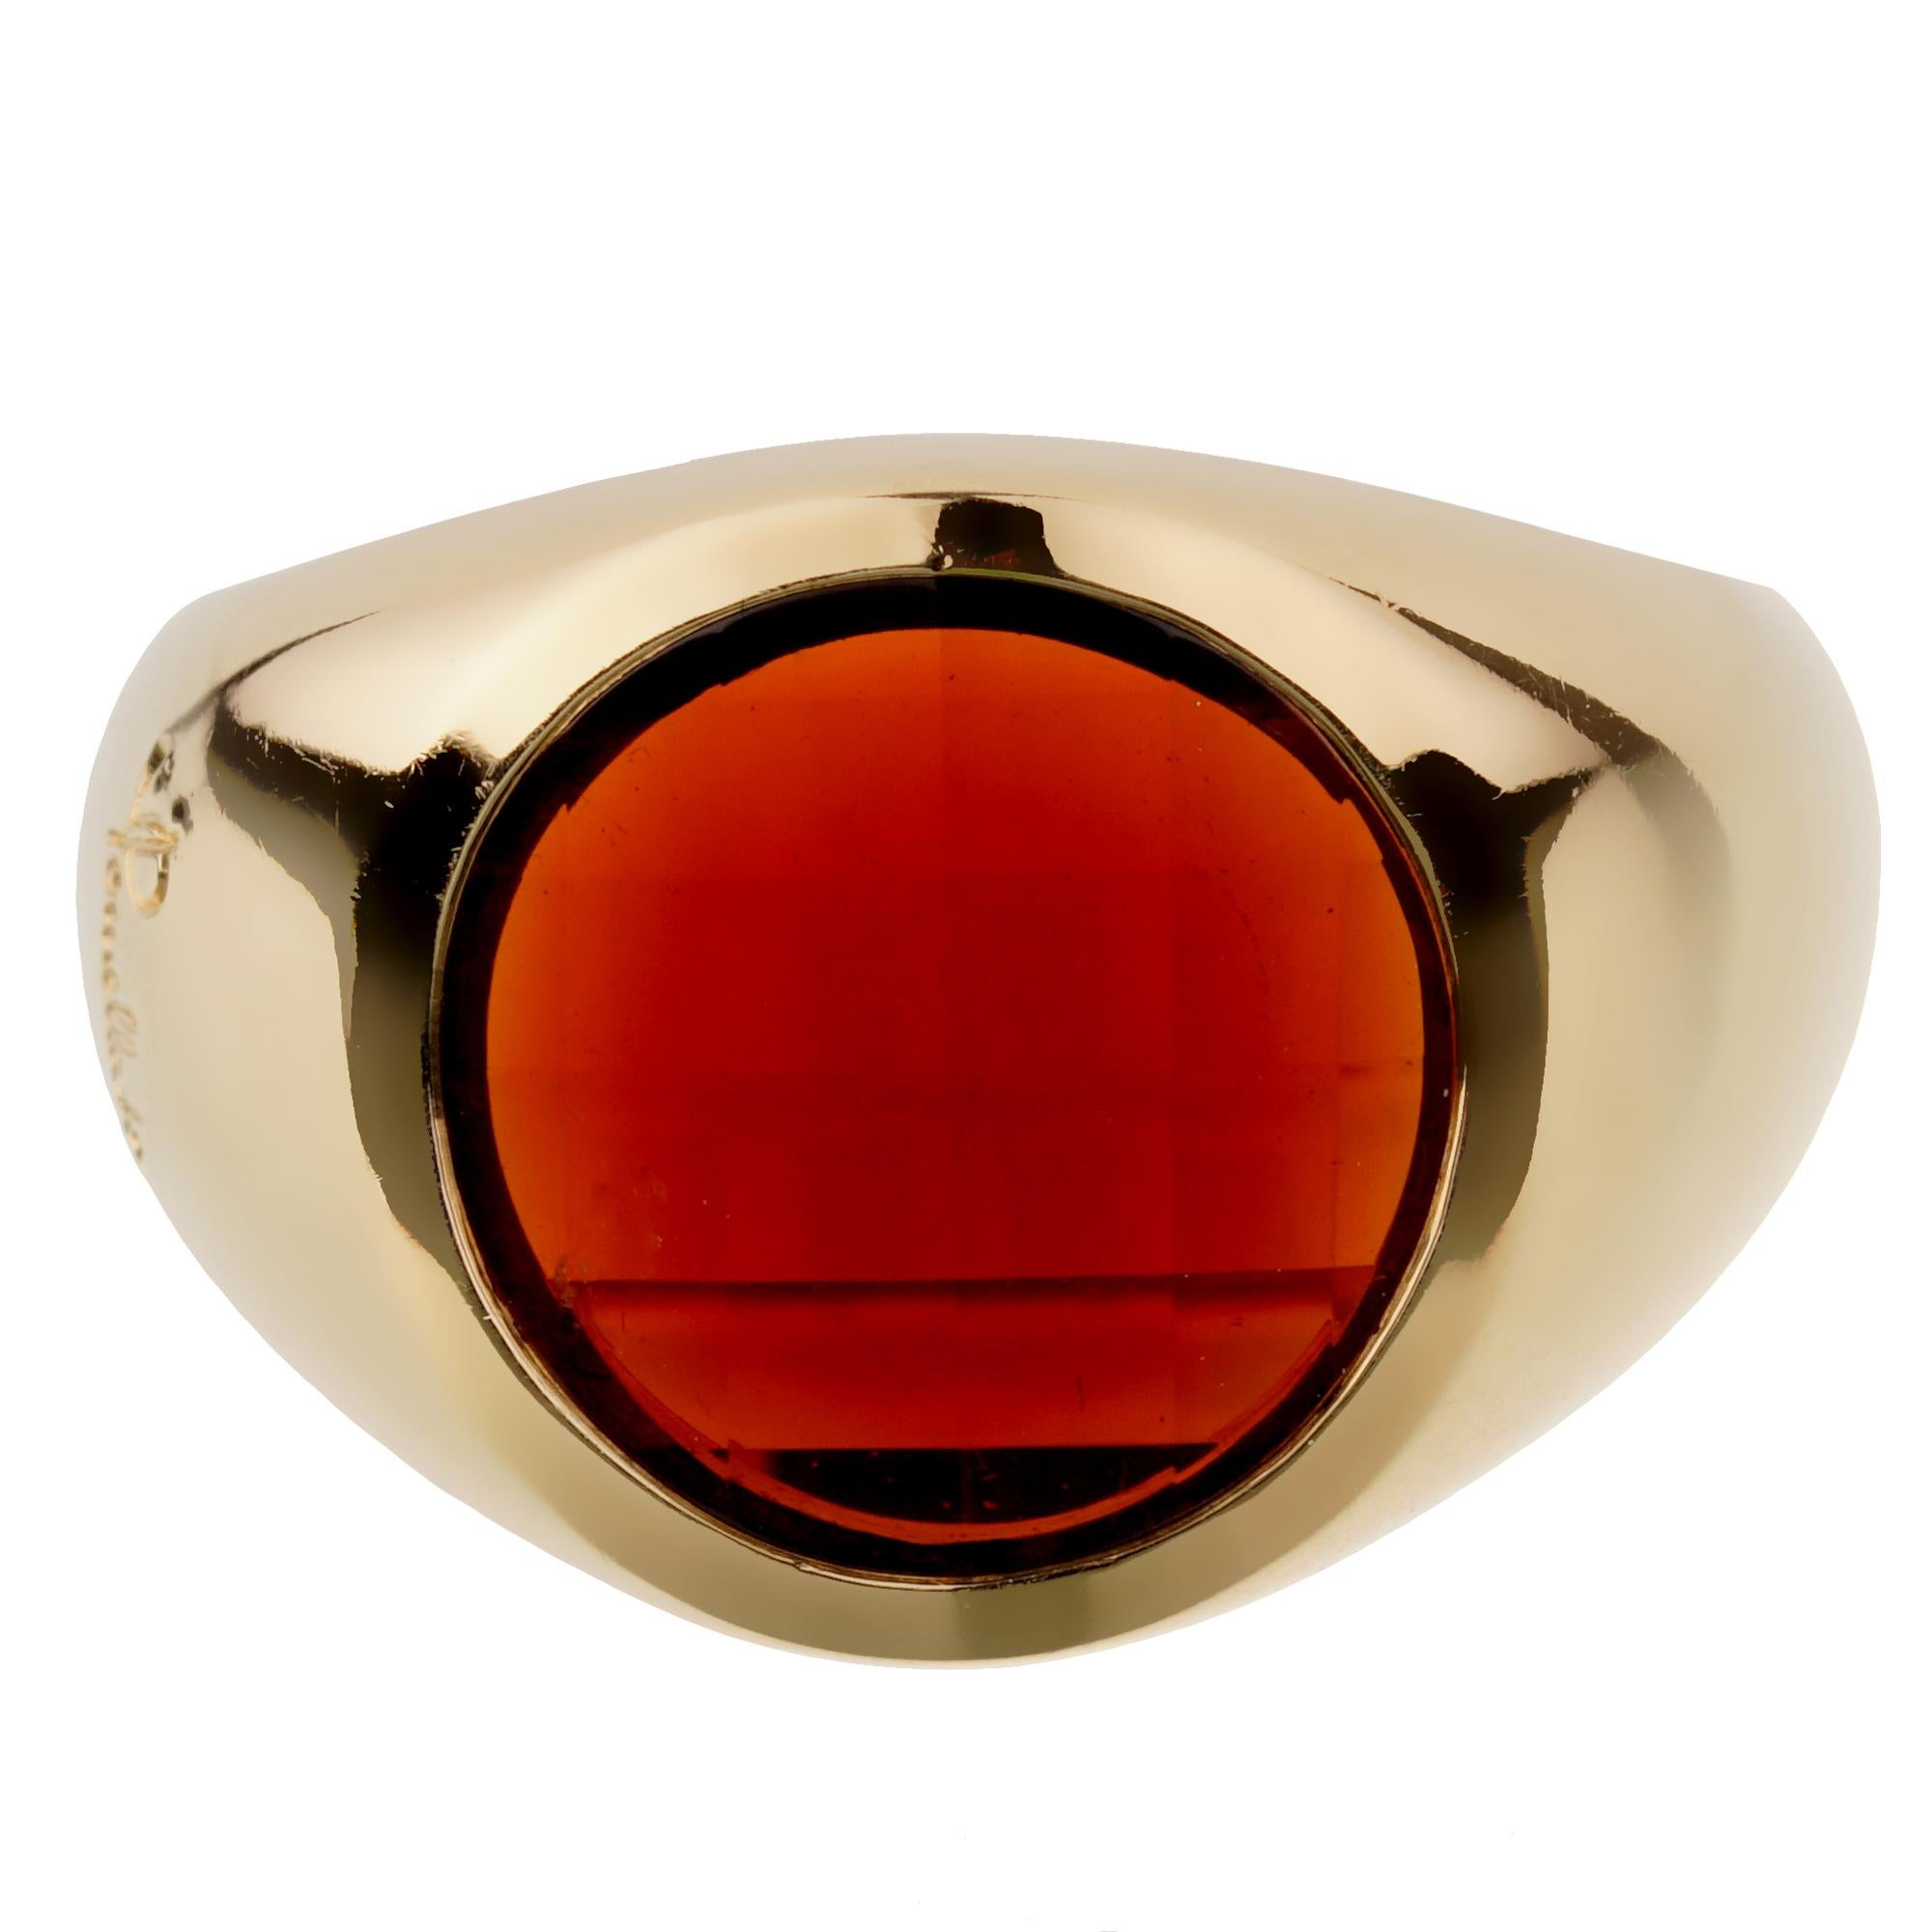 A chic Pomellato cocktail ring showcasing a round step cut garnet in 18k yellow gold. The ring measures a size 6 3/4 and can be resized if needed.